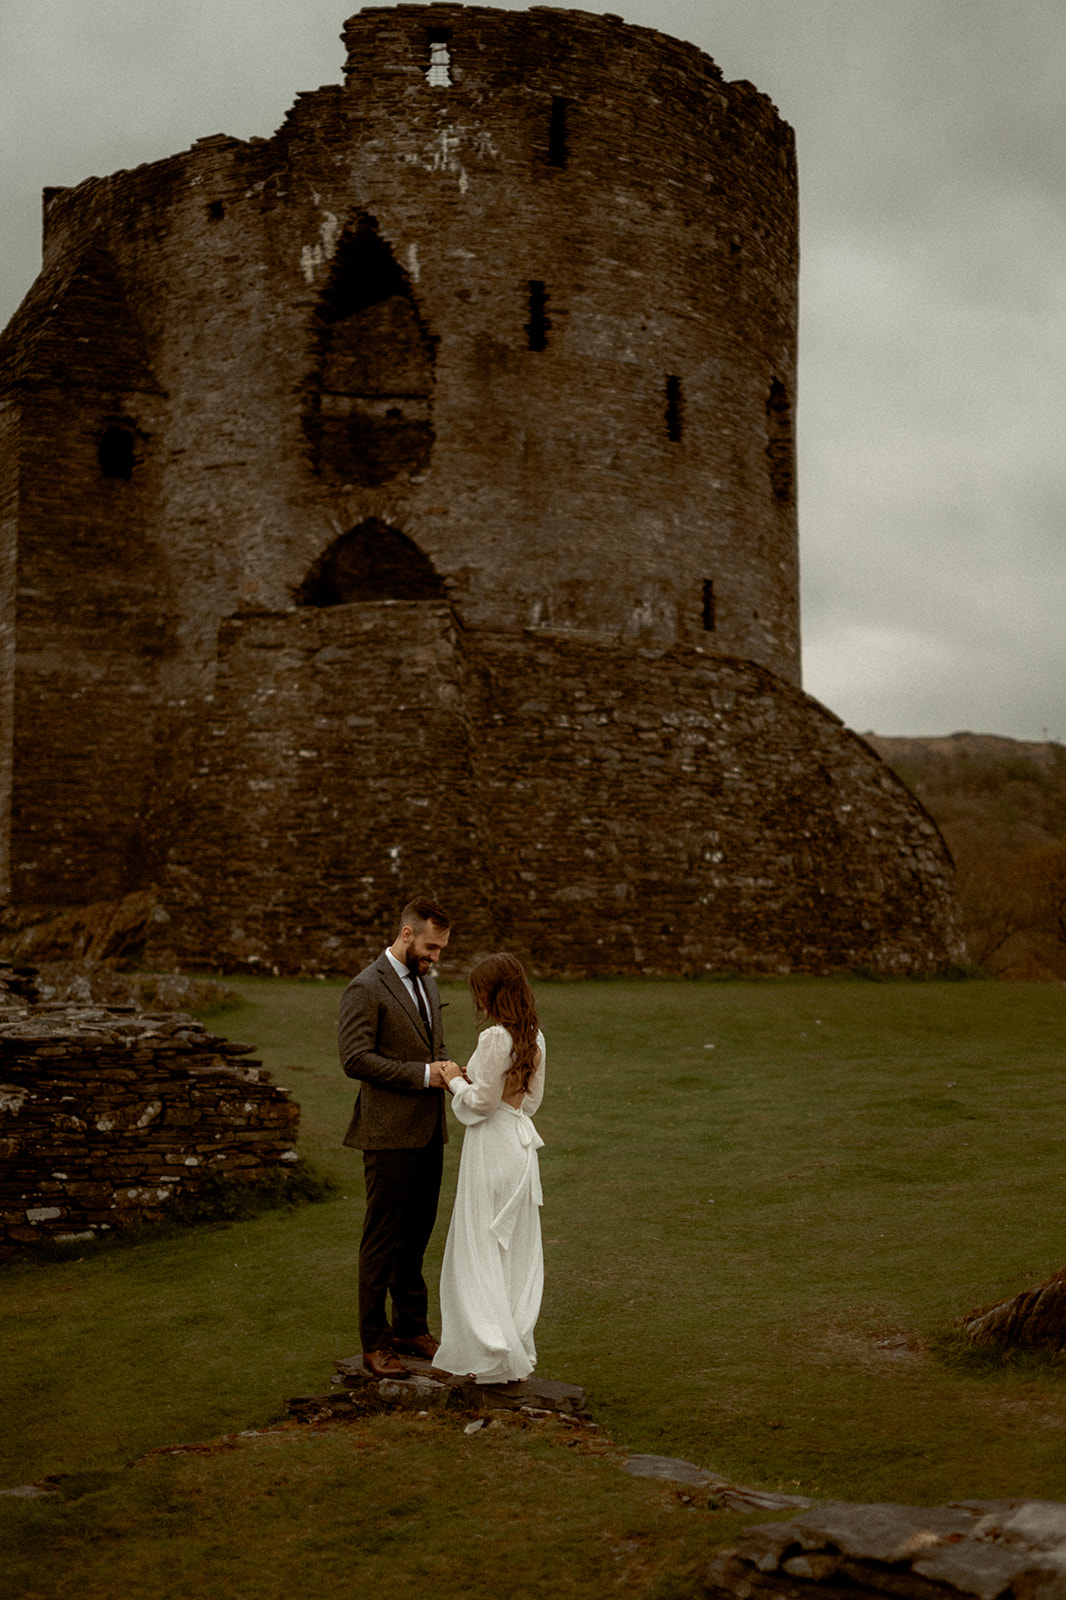 a couple from Canada in front of a castle in Wales on their elopement-style wedding day.